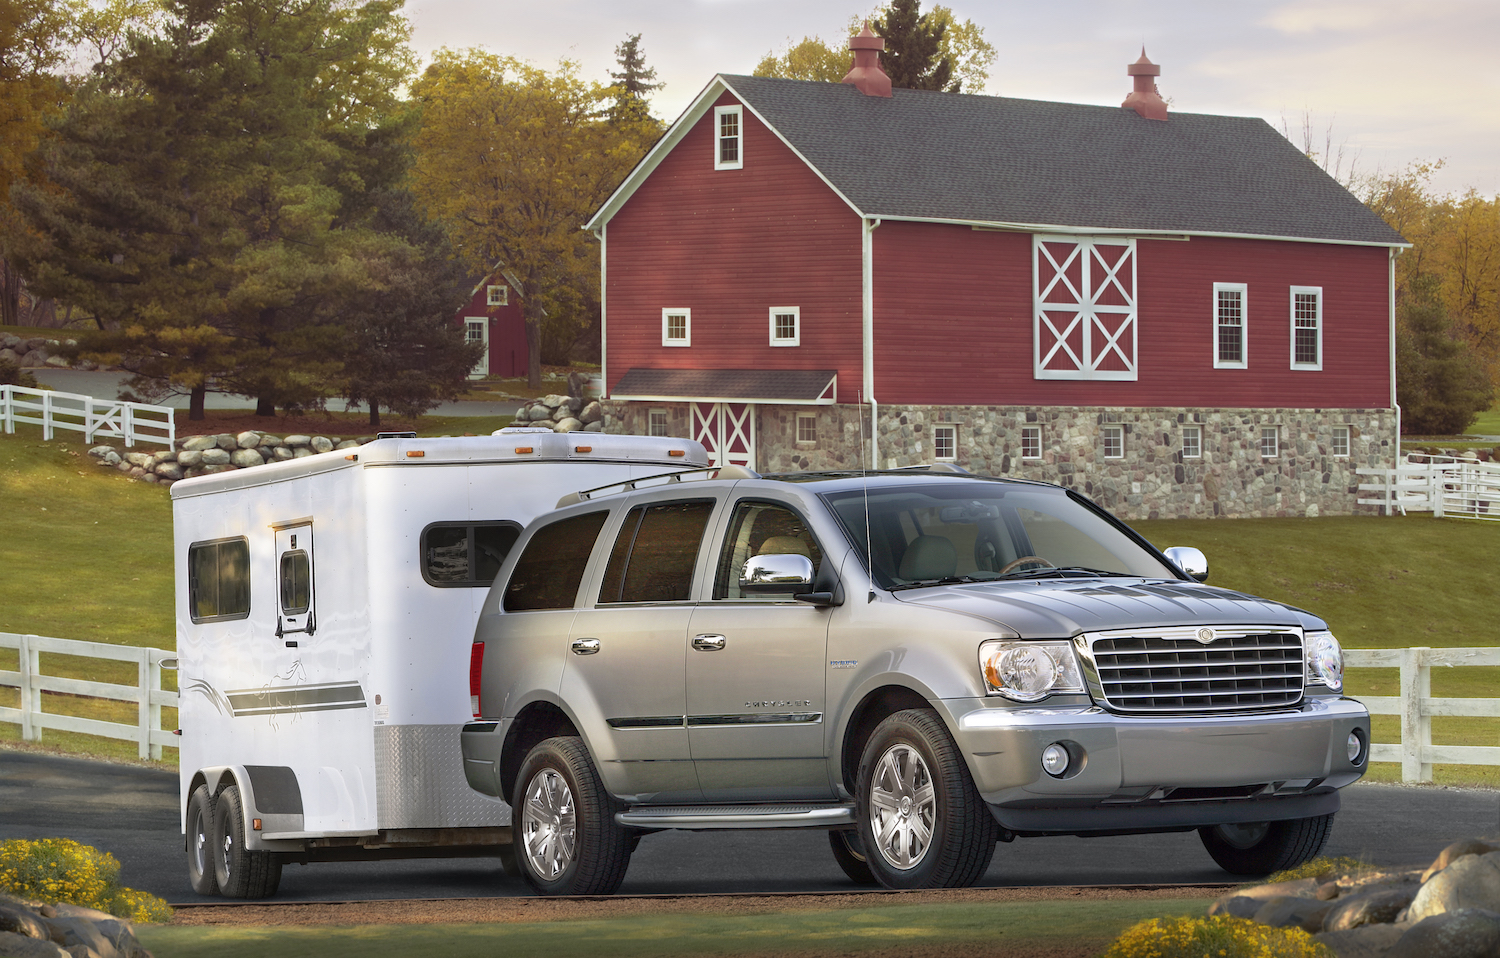 A 2009 Chrysler Aspen luxury full-size HEMI V8 hybrid SUV shows off its towing capacity, hitched to a trailer with a barn visible in the background.